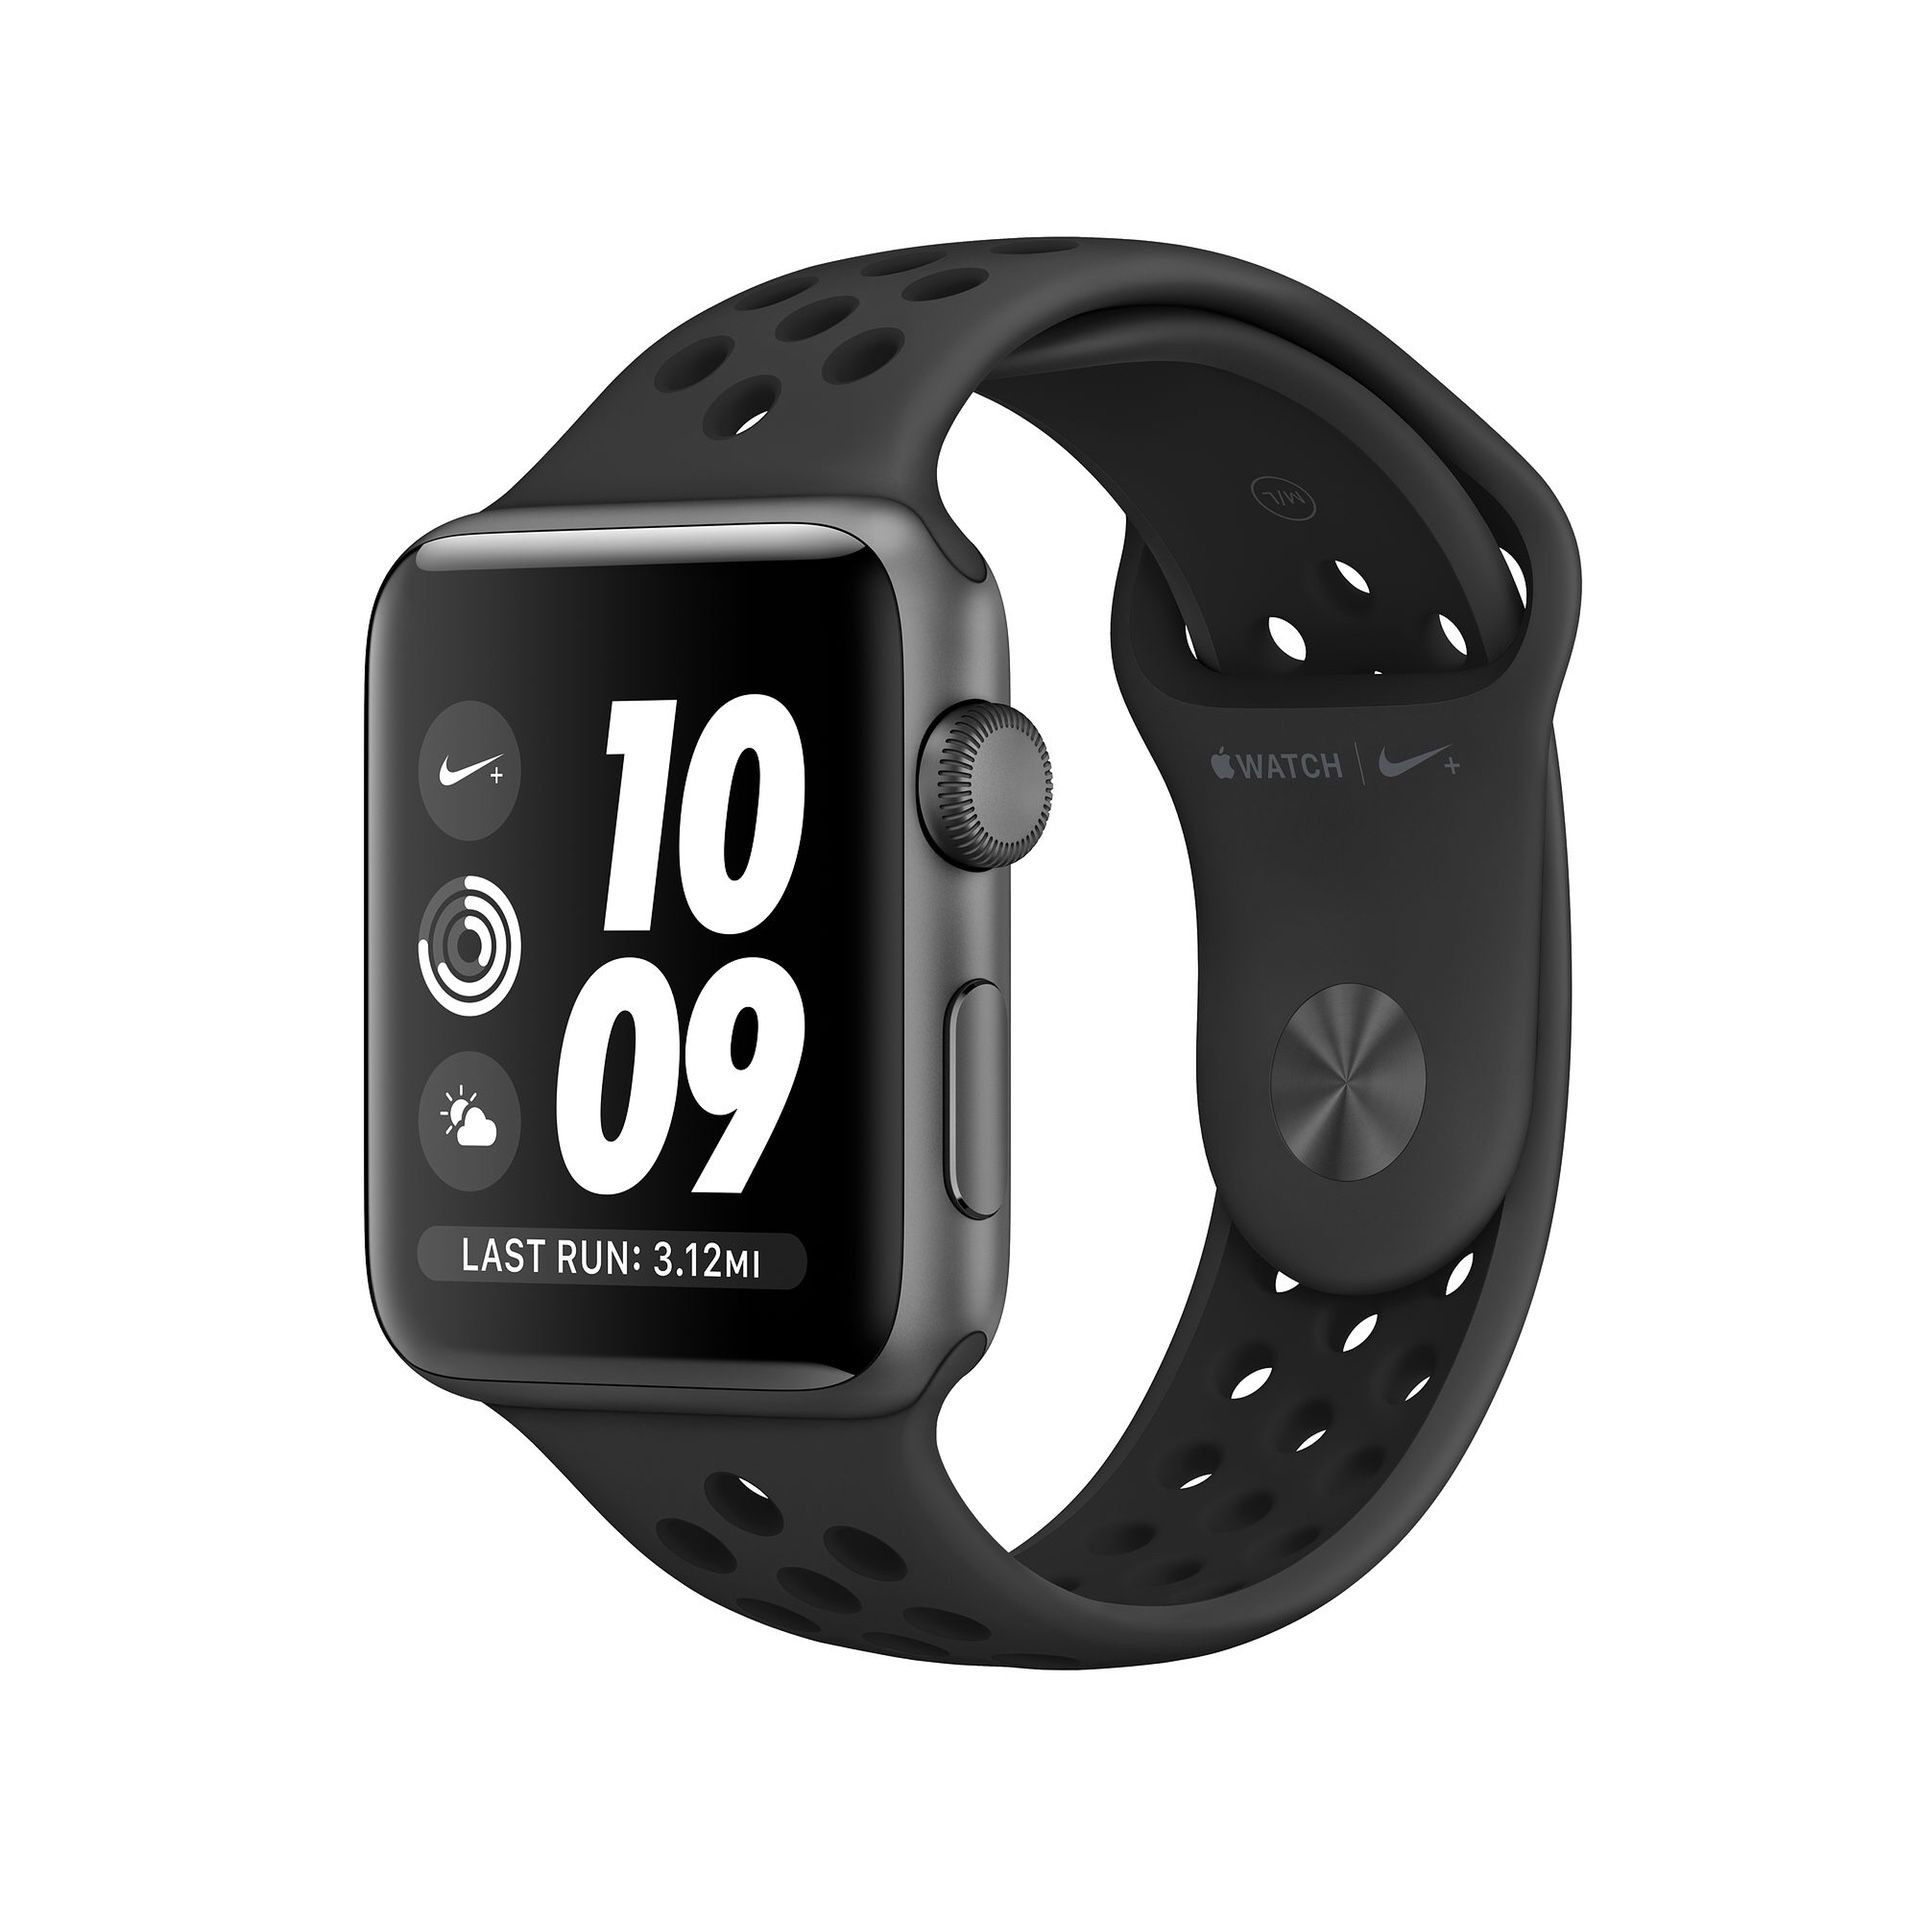 Apple Watch Nike+ Space Gray Aluminum Case with Anthracite/Black Nike Sport Band